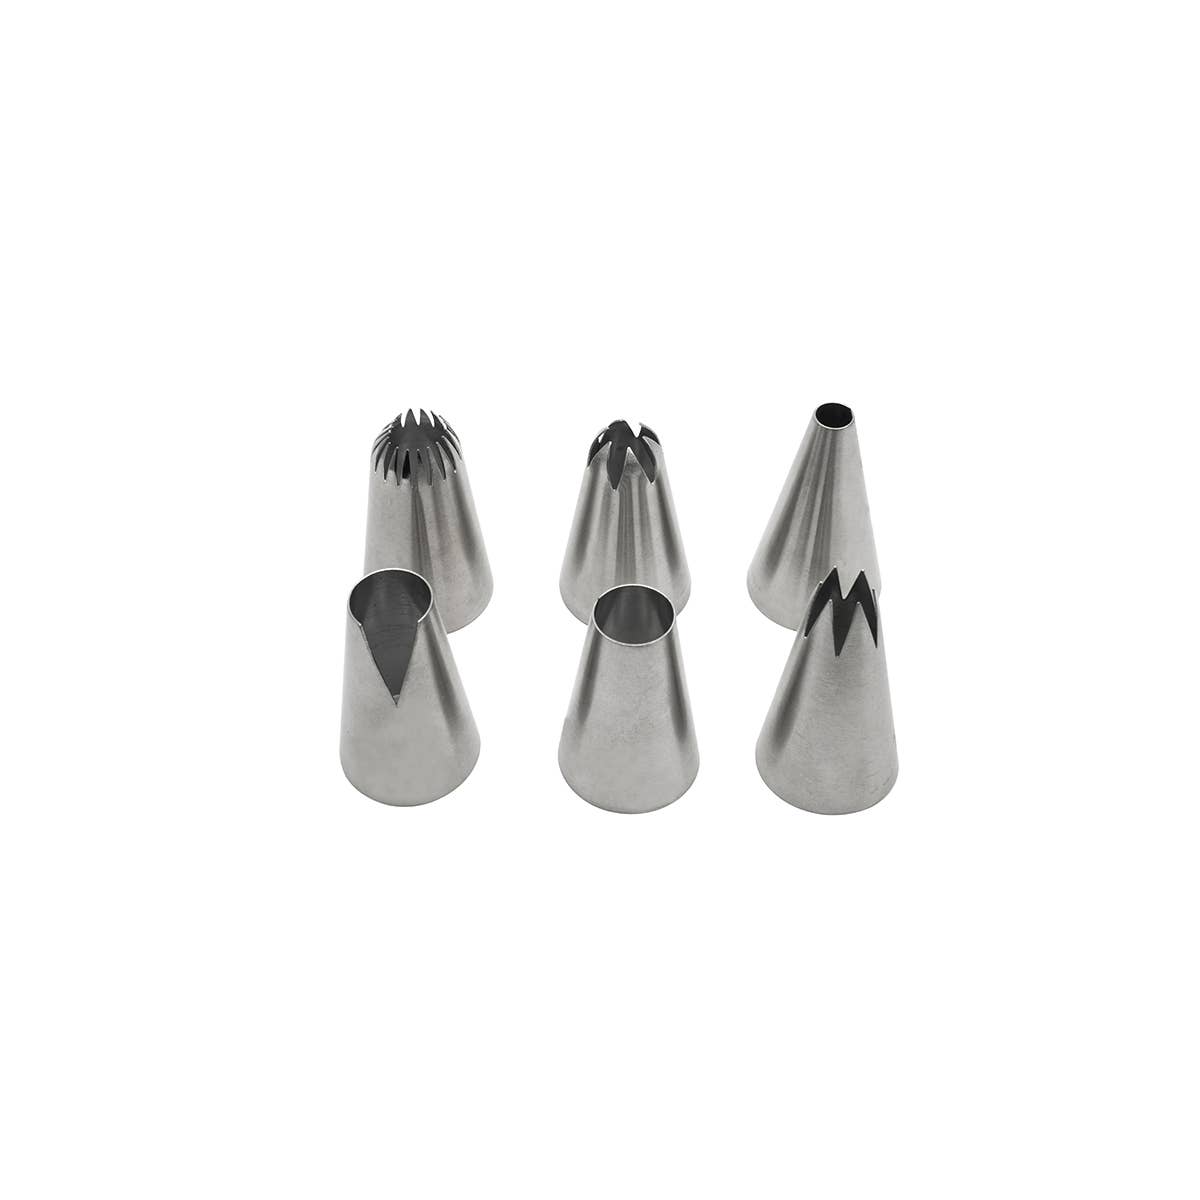 Set of 6 Zenker large stainless steel pastry nozzles